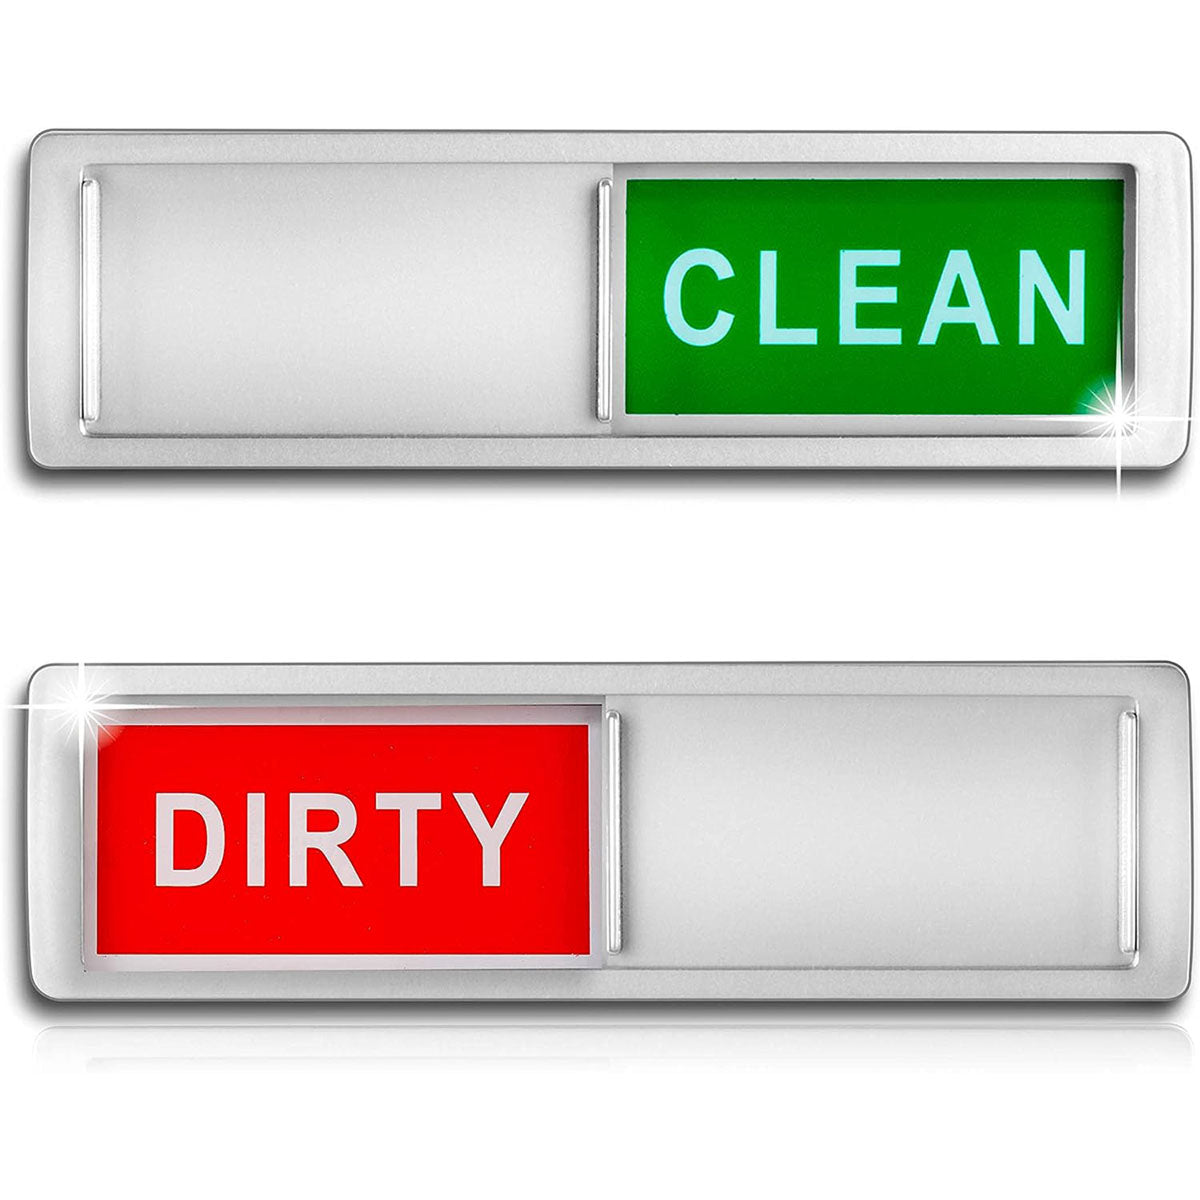 Dishwasher Magnet Clean Dirty Sign - Sleek Design - Kitchen Gadgets - Heavy Duty Magnet with Optional Stickers